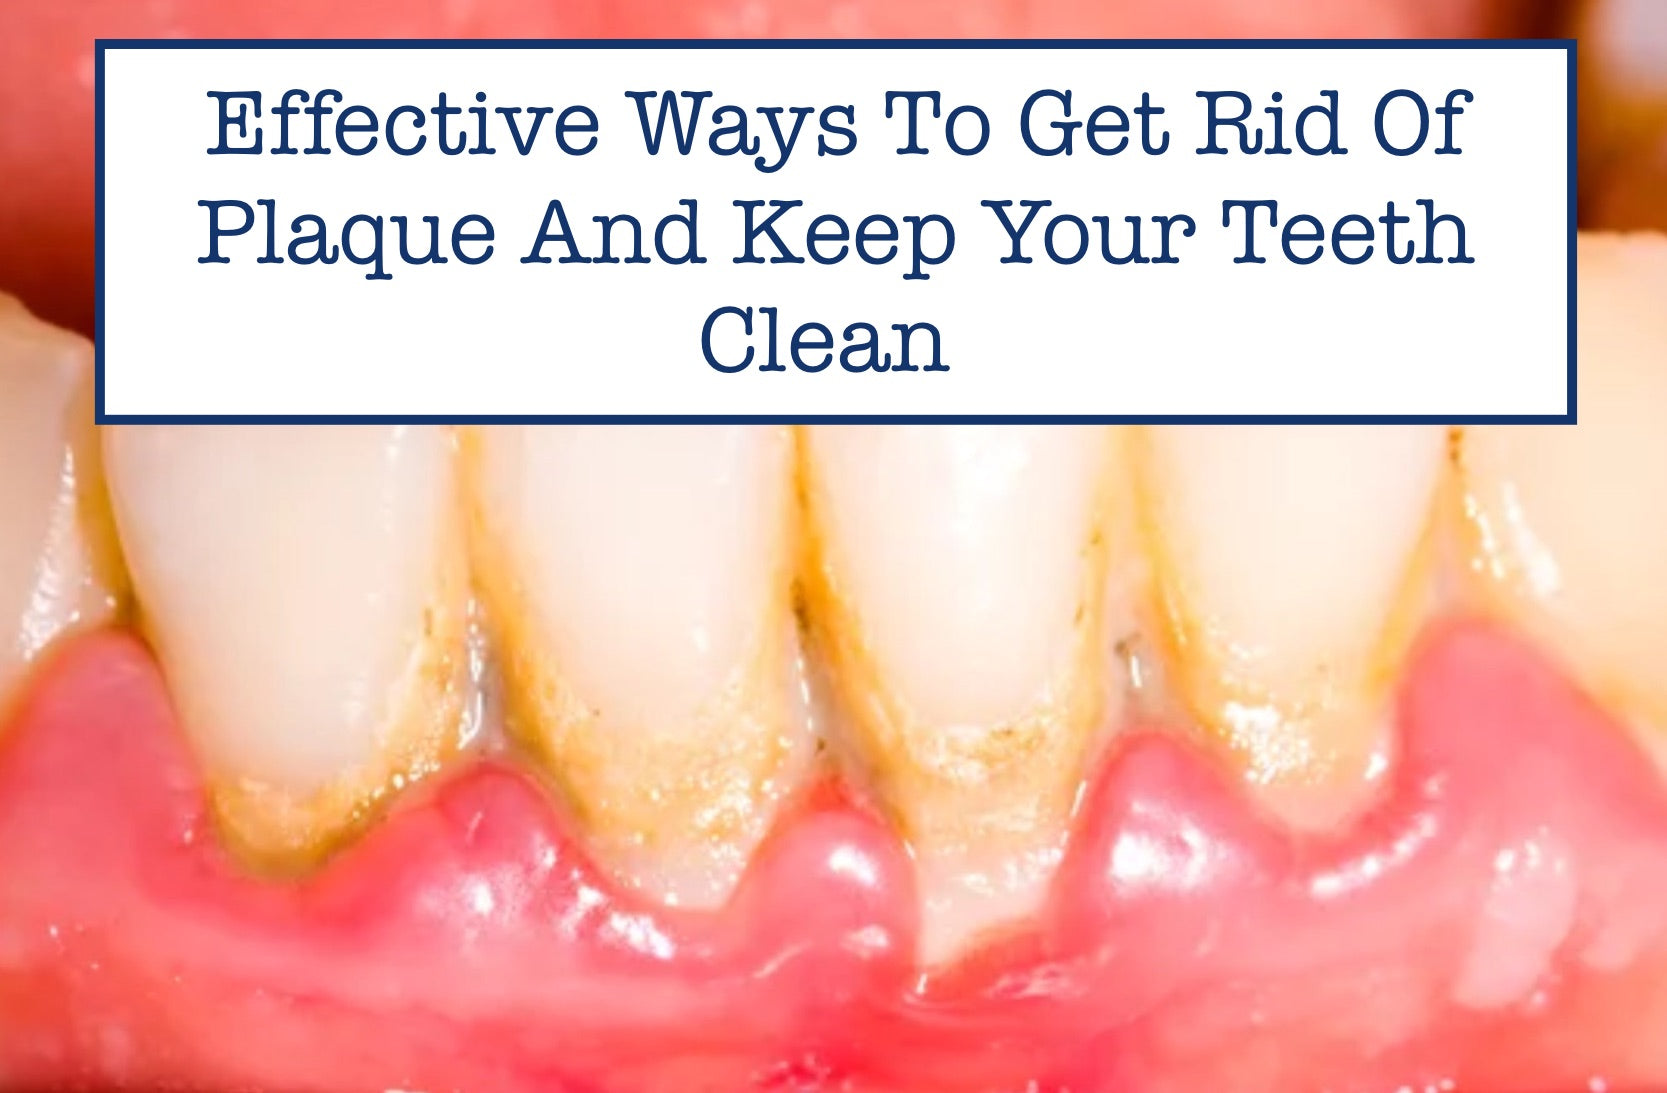 Effective Ways To Get Rid Of Plaque And Keep Your Teeth Clean 